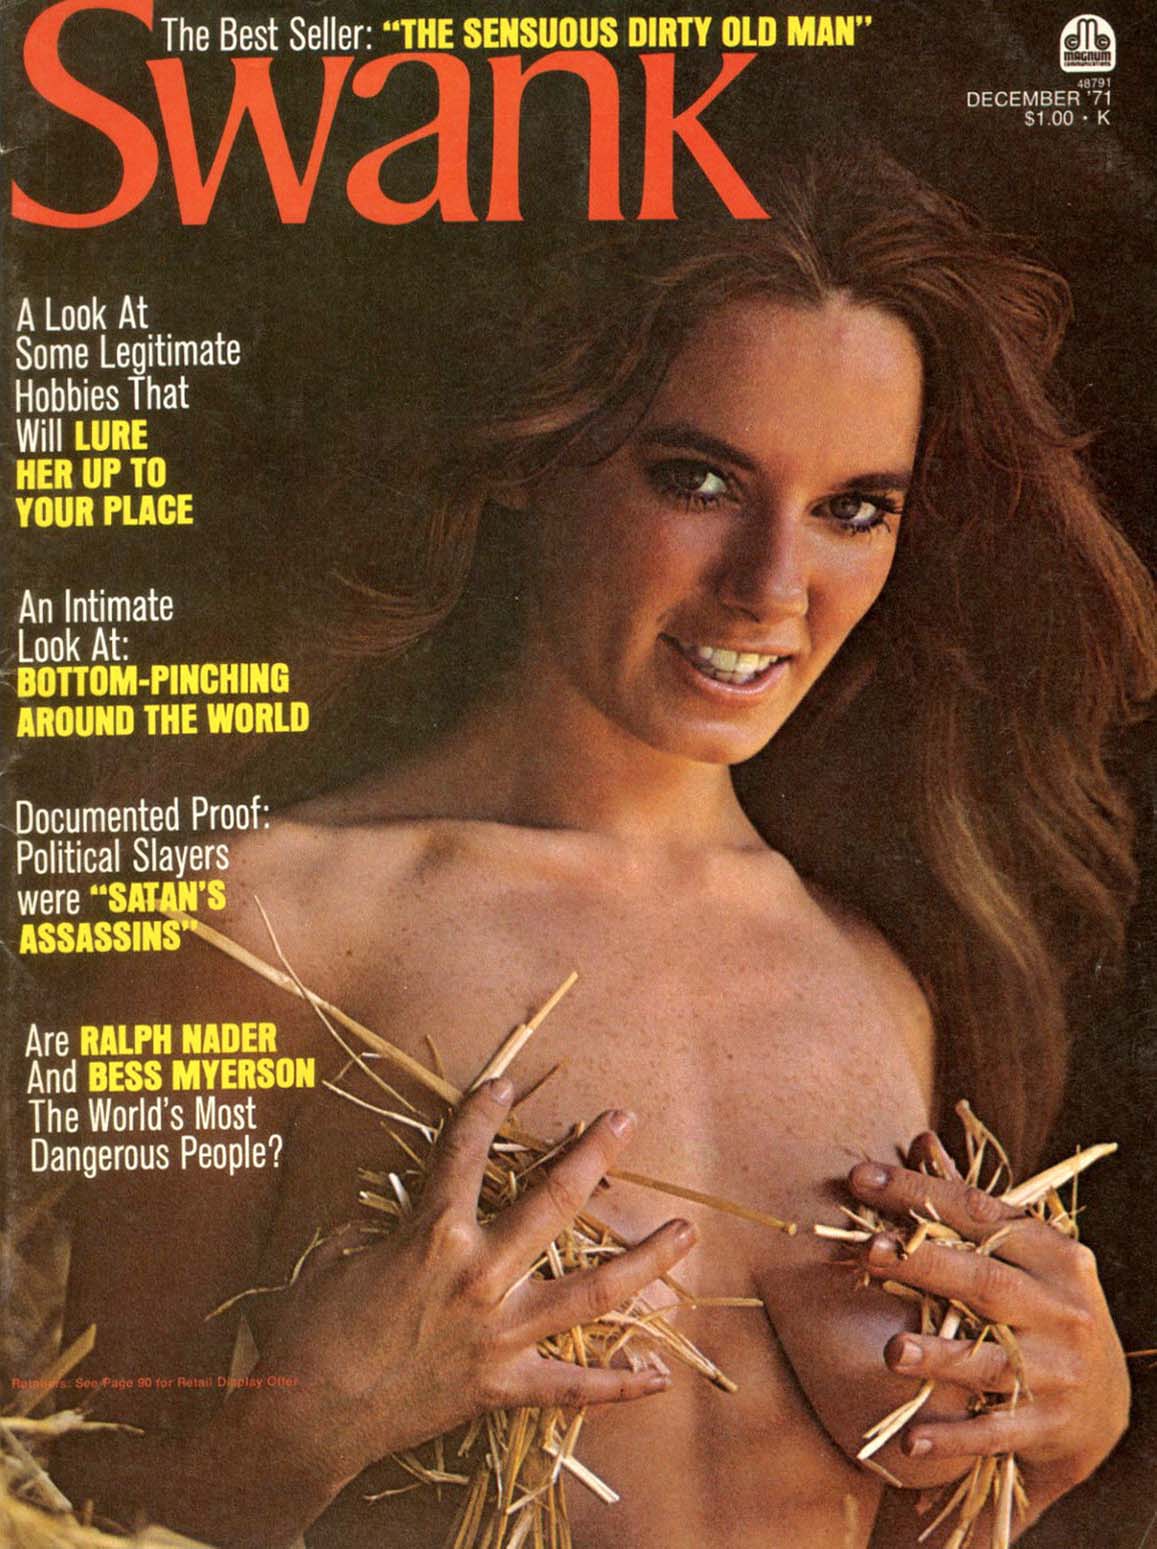 Swank December 1971 magazine back issue Swank magizine back copy Swank December 1971 Adult Pornographic Magazine Back Issue Published by Magna Publishing Group. A Look At Some Legitimate Hobbies That Will Lure Her Up To Your Place.